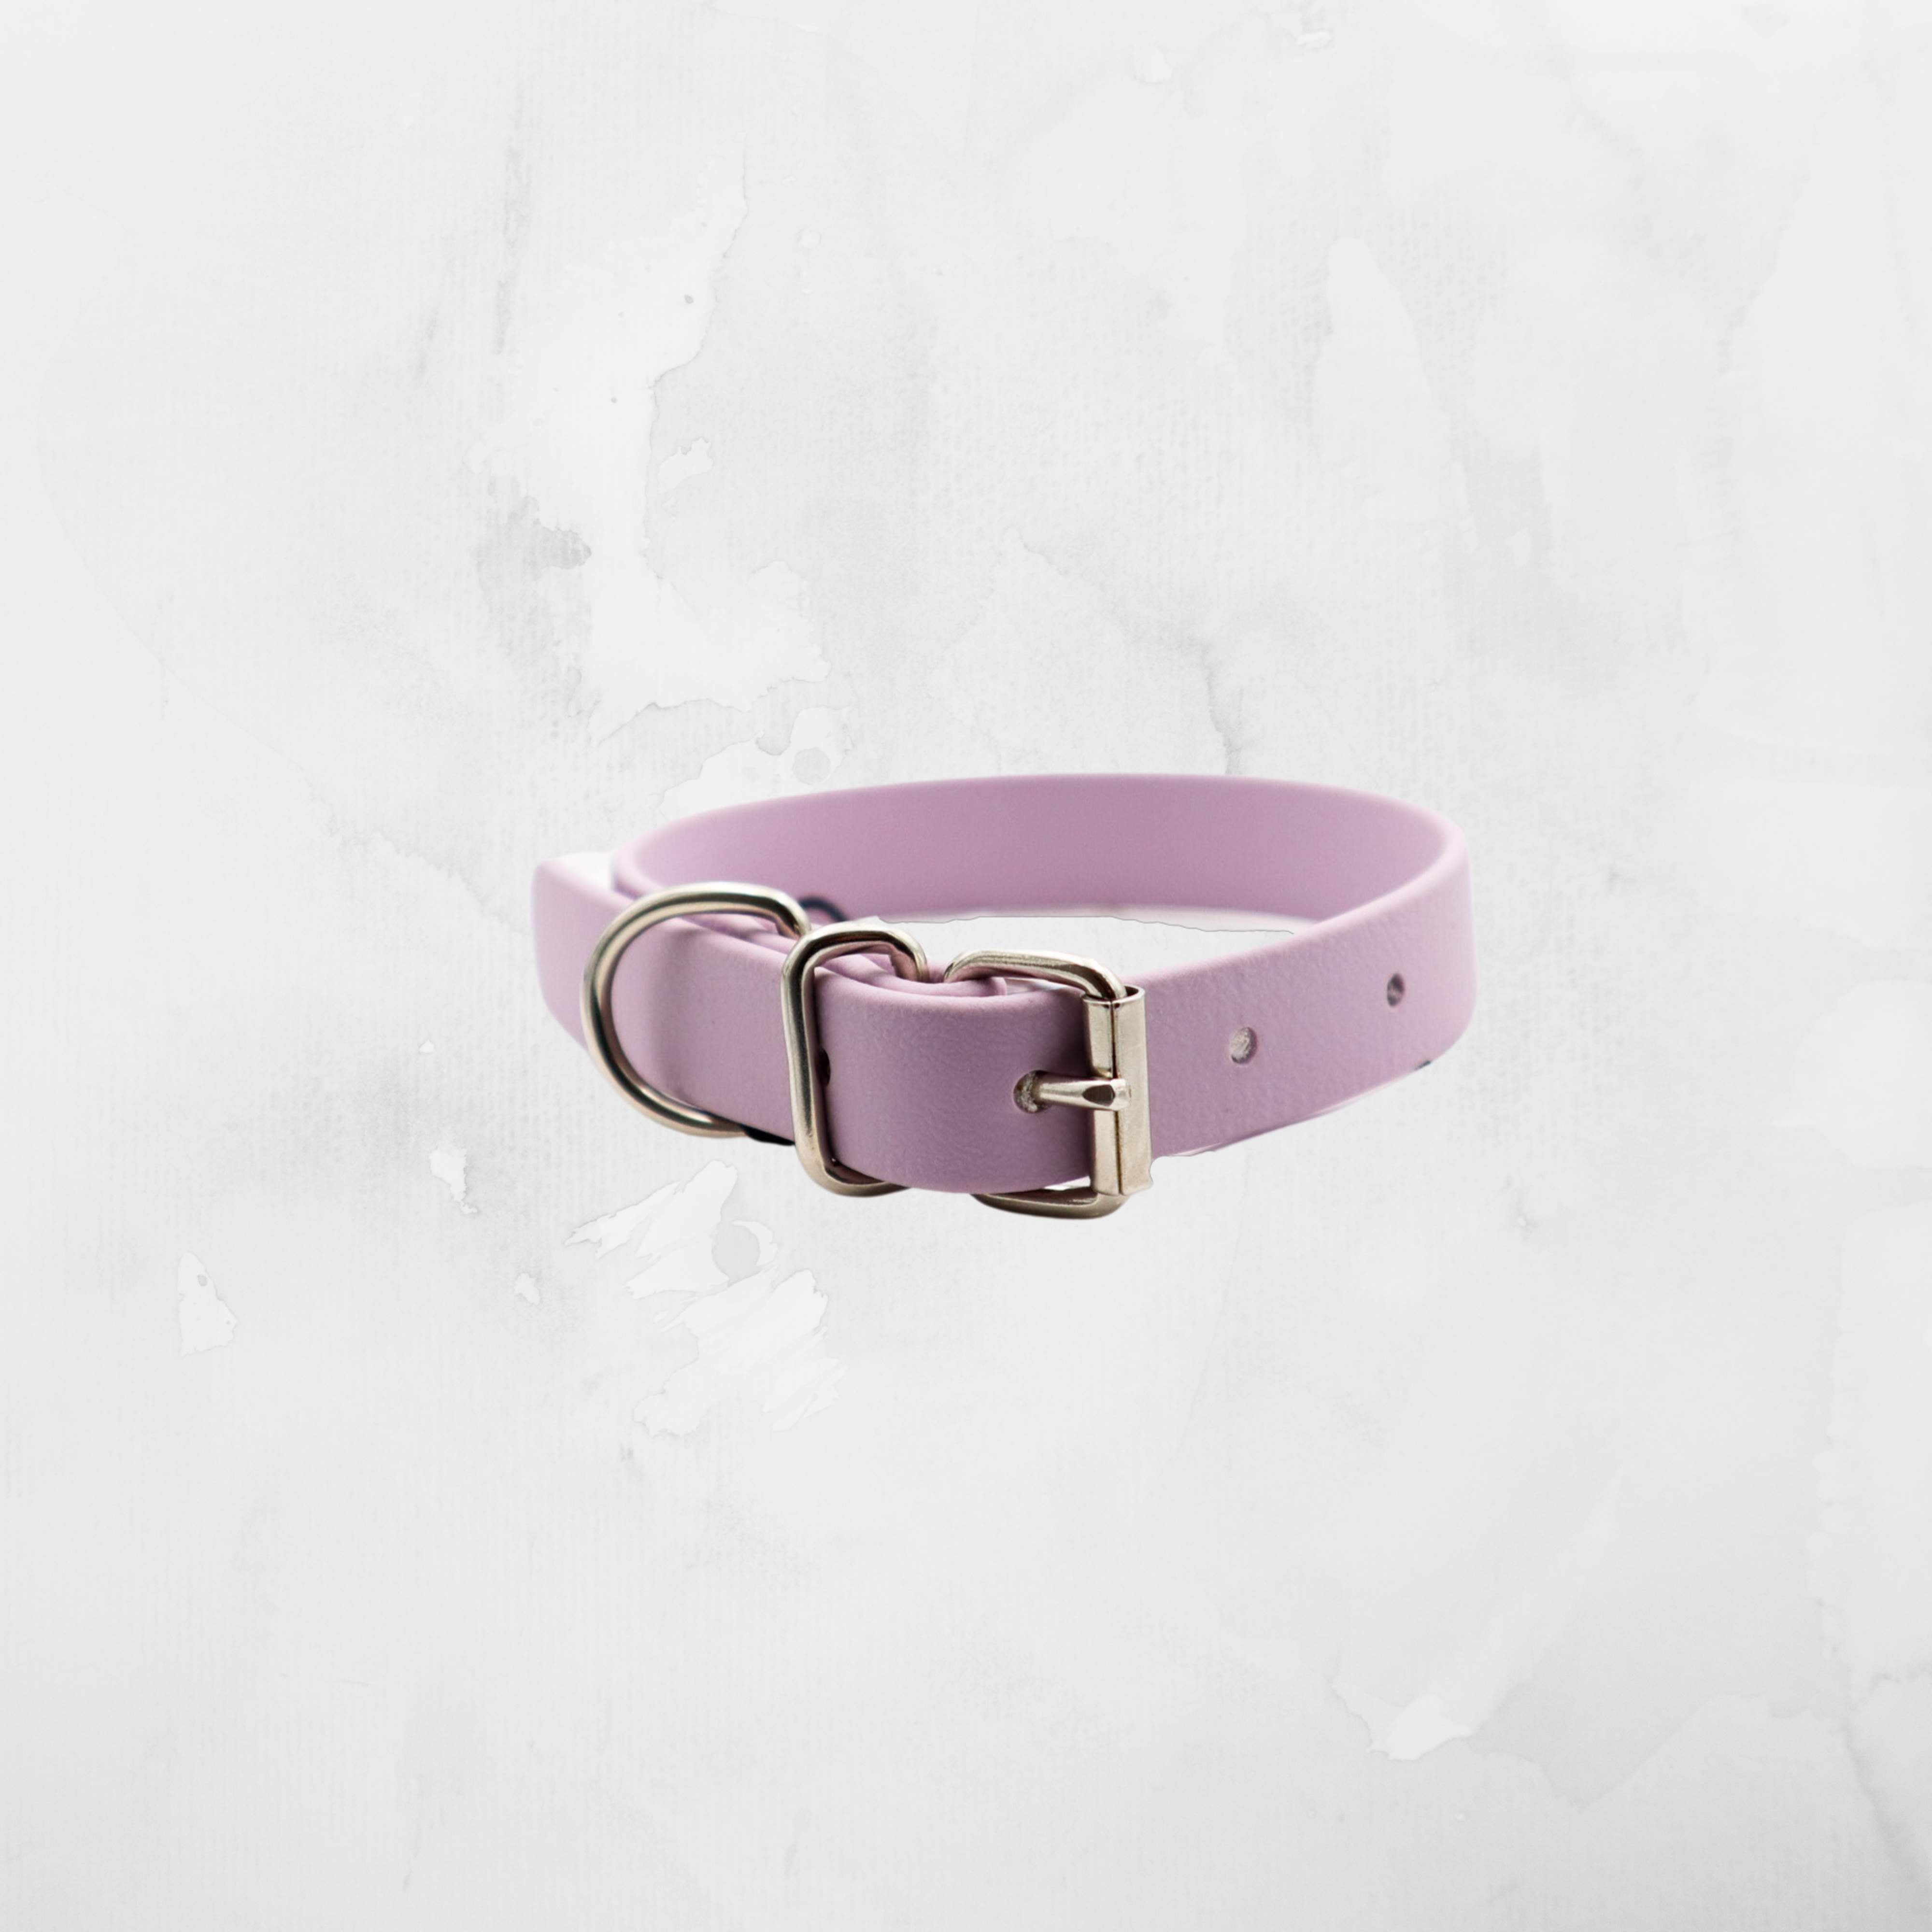 Soft lavender biothane dog collar with a silver  buckle and matching loop, set against a white textured backdrop Distinguish Me